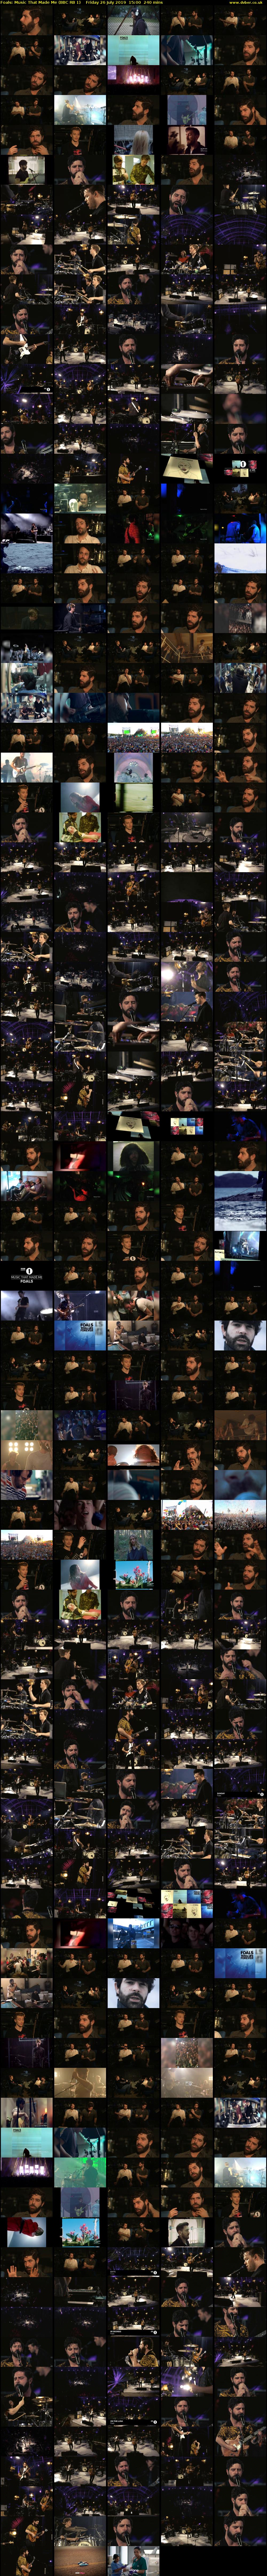 Foals: Music That Made Me (BBC RB 1) Friday 26 July 2019 15:00 - 19:00